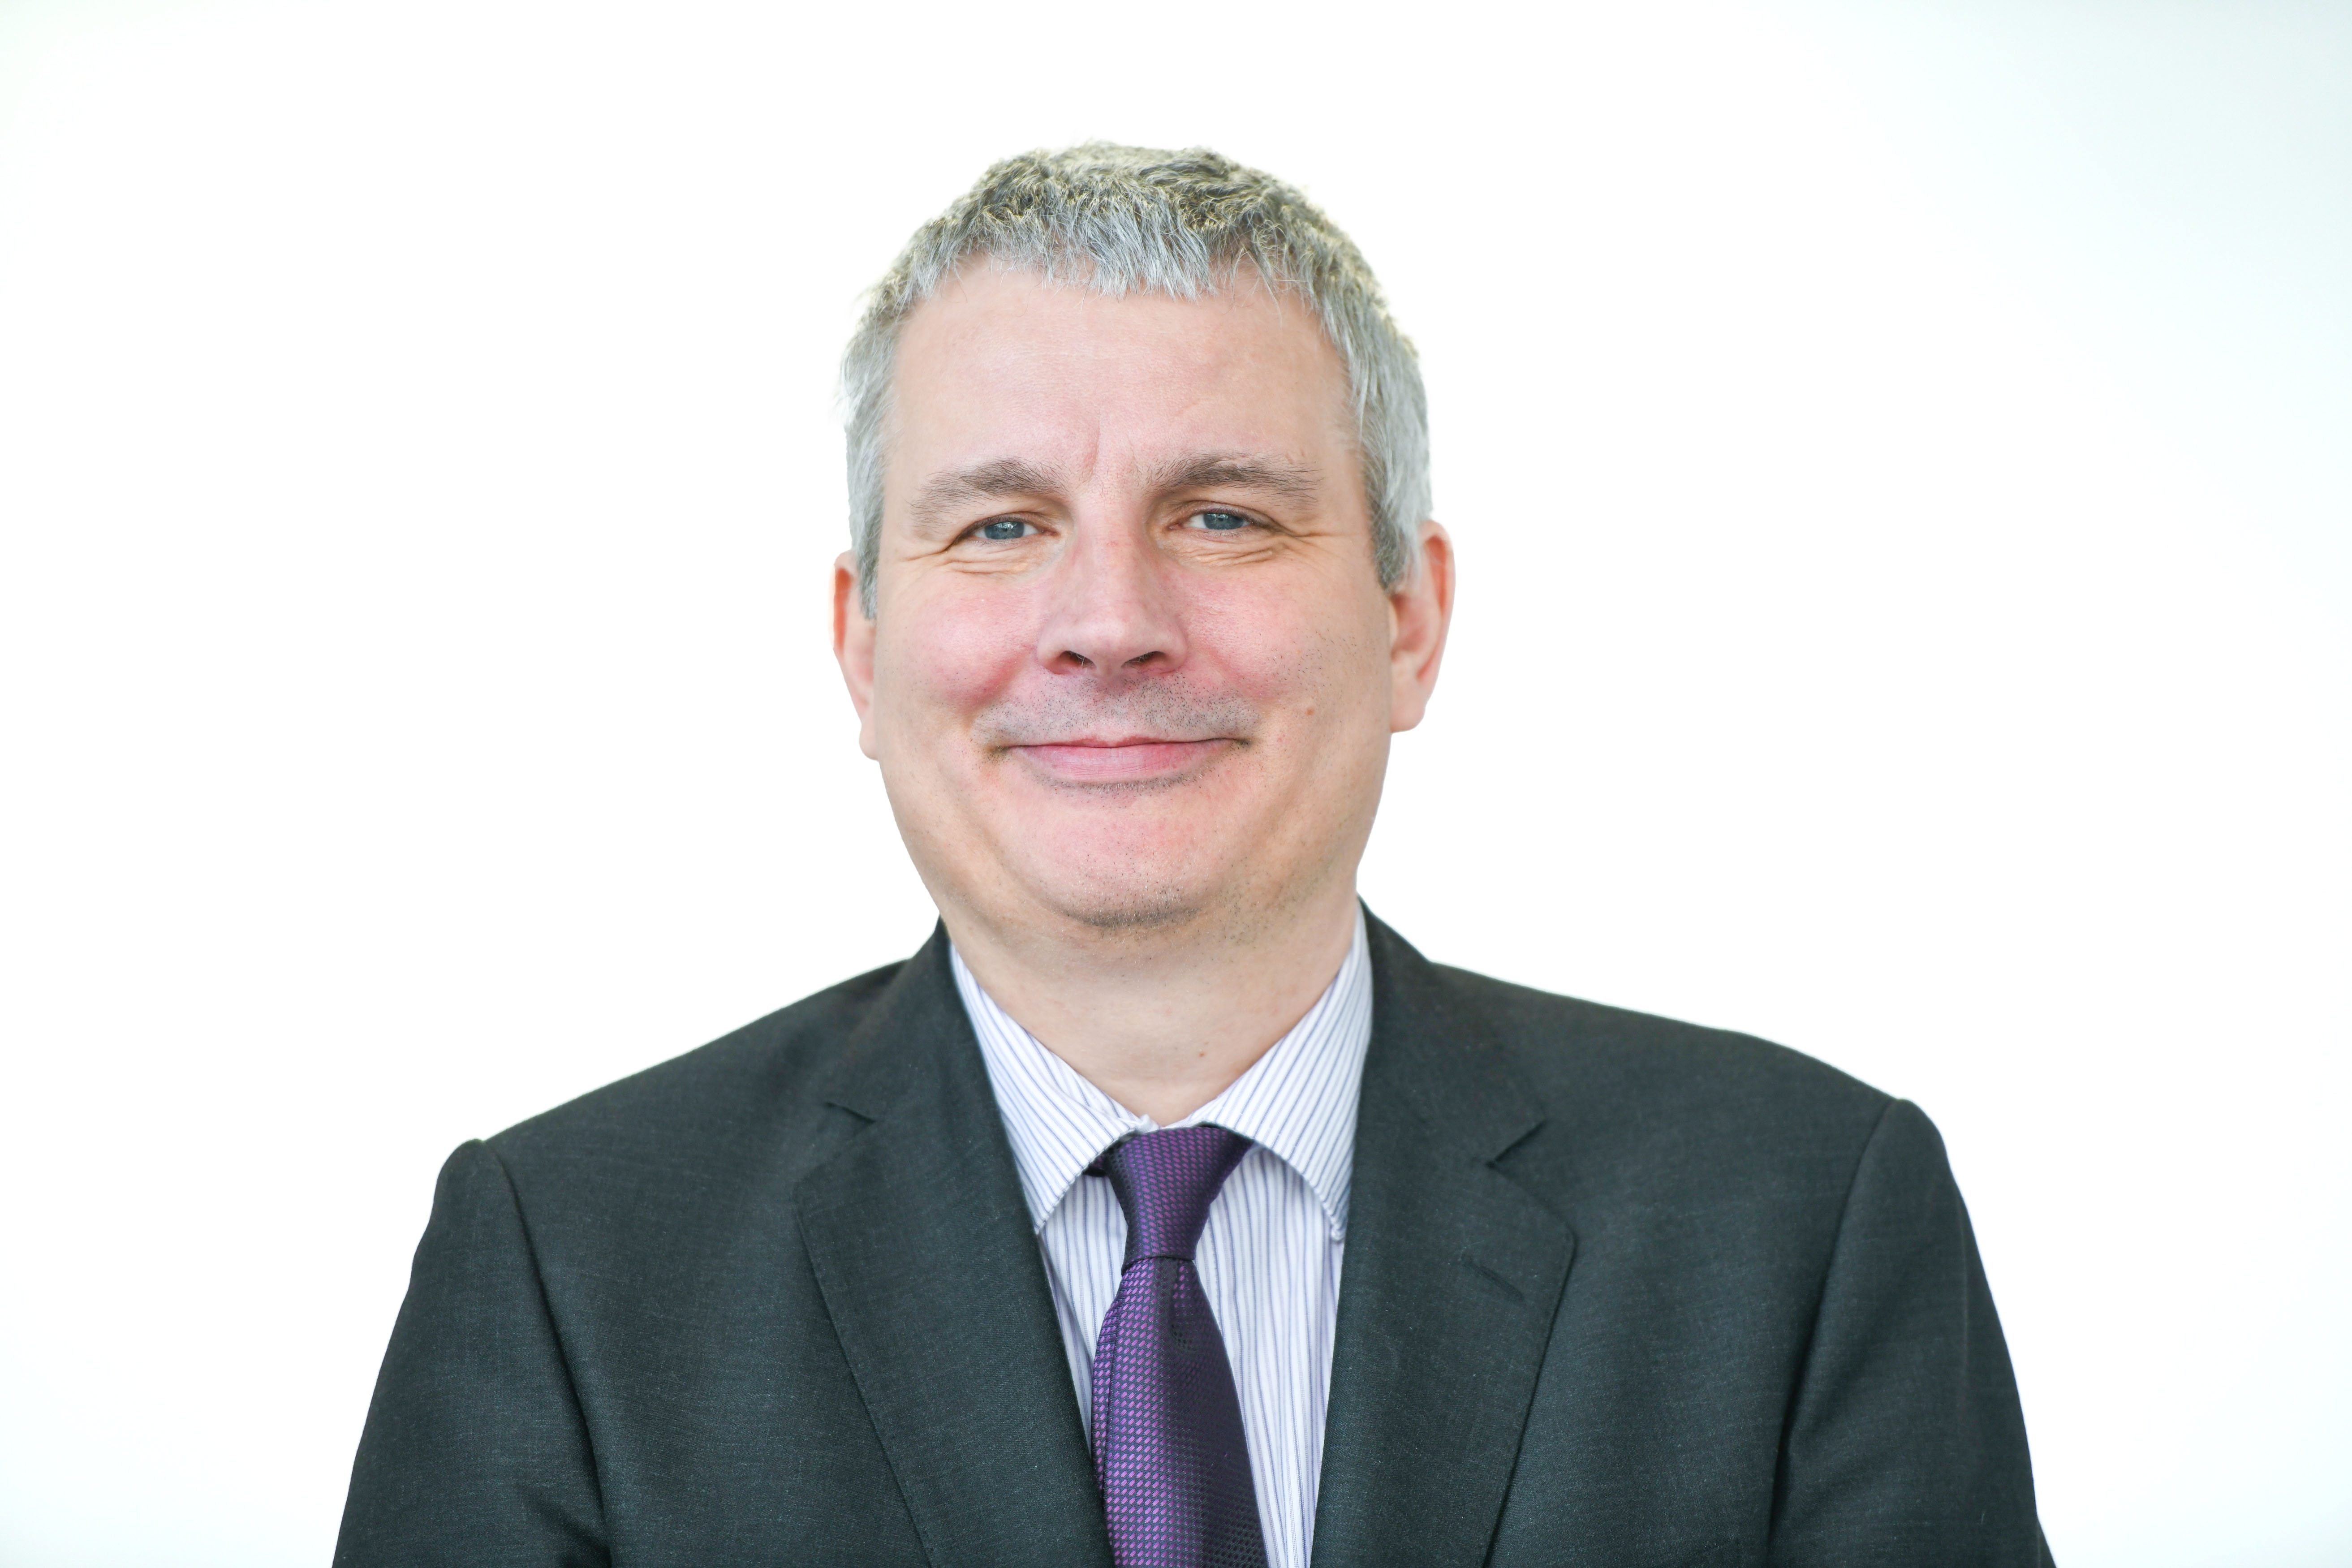 A profile picture of Mark Phillipson, a Senior Lecturer in Civil Engineering and Environmental Management at GCU.